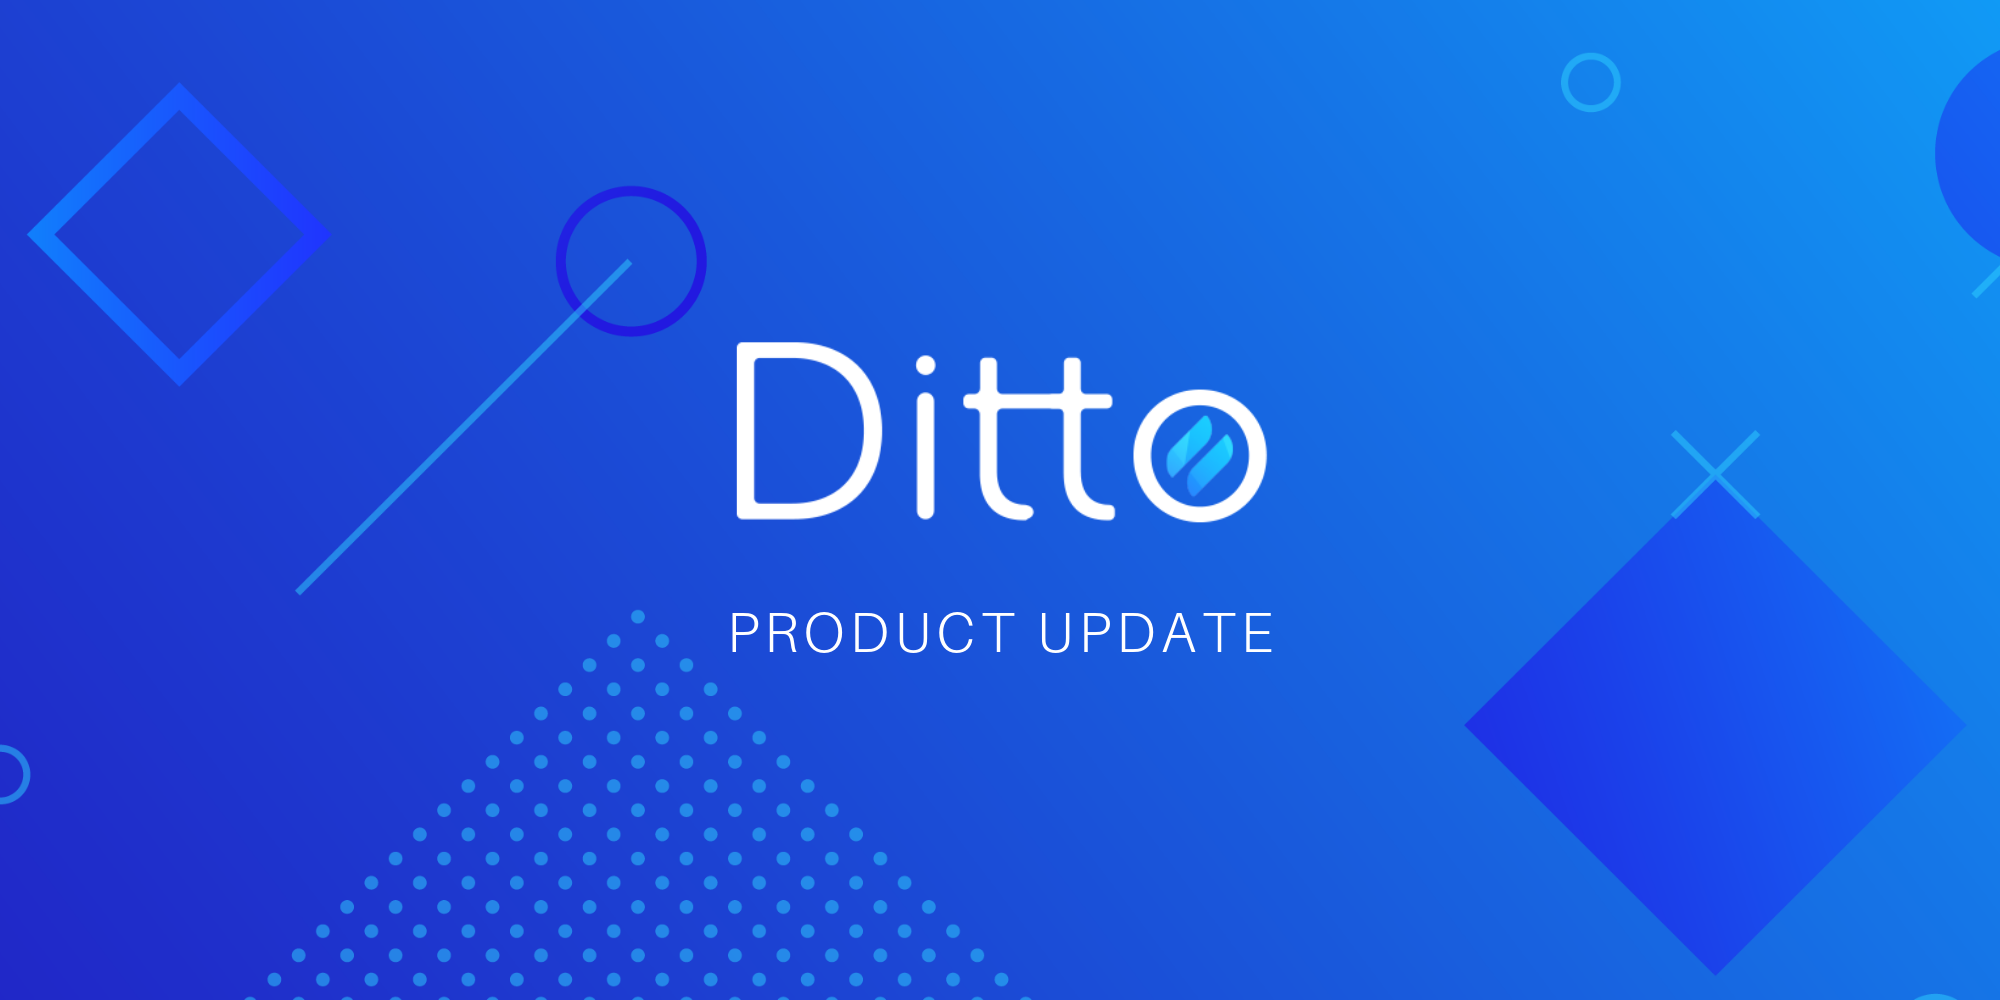 Ditto Update Brings Increased Audio Support and Display Improvements - Featured Image